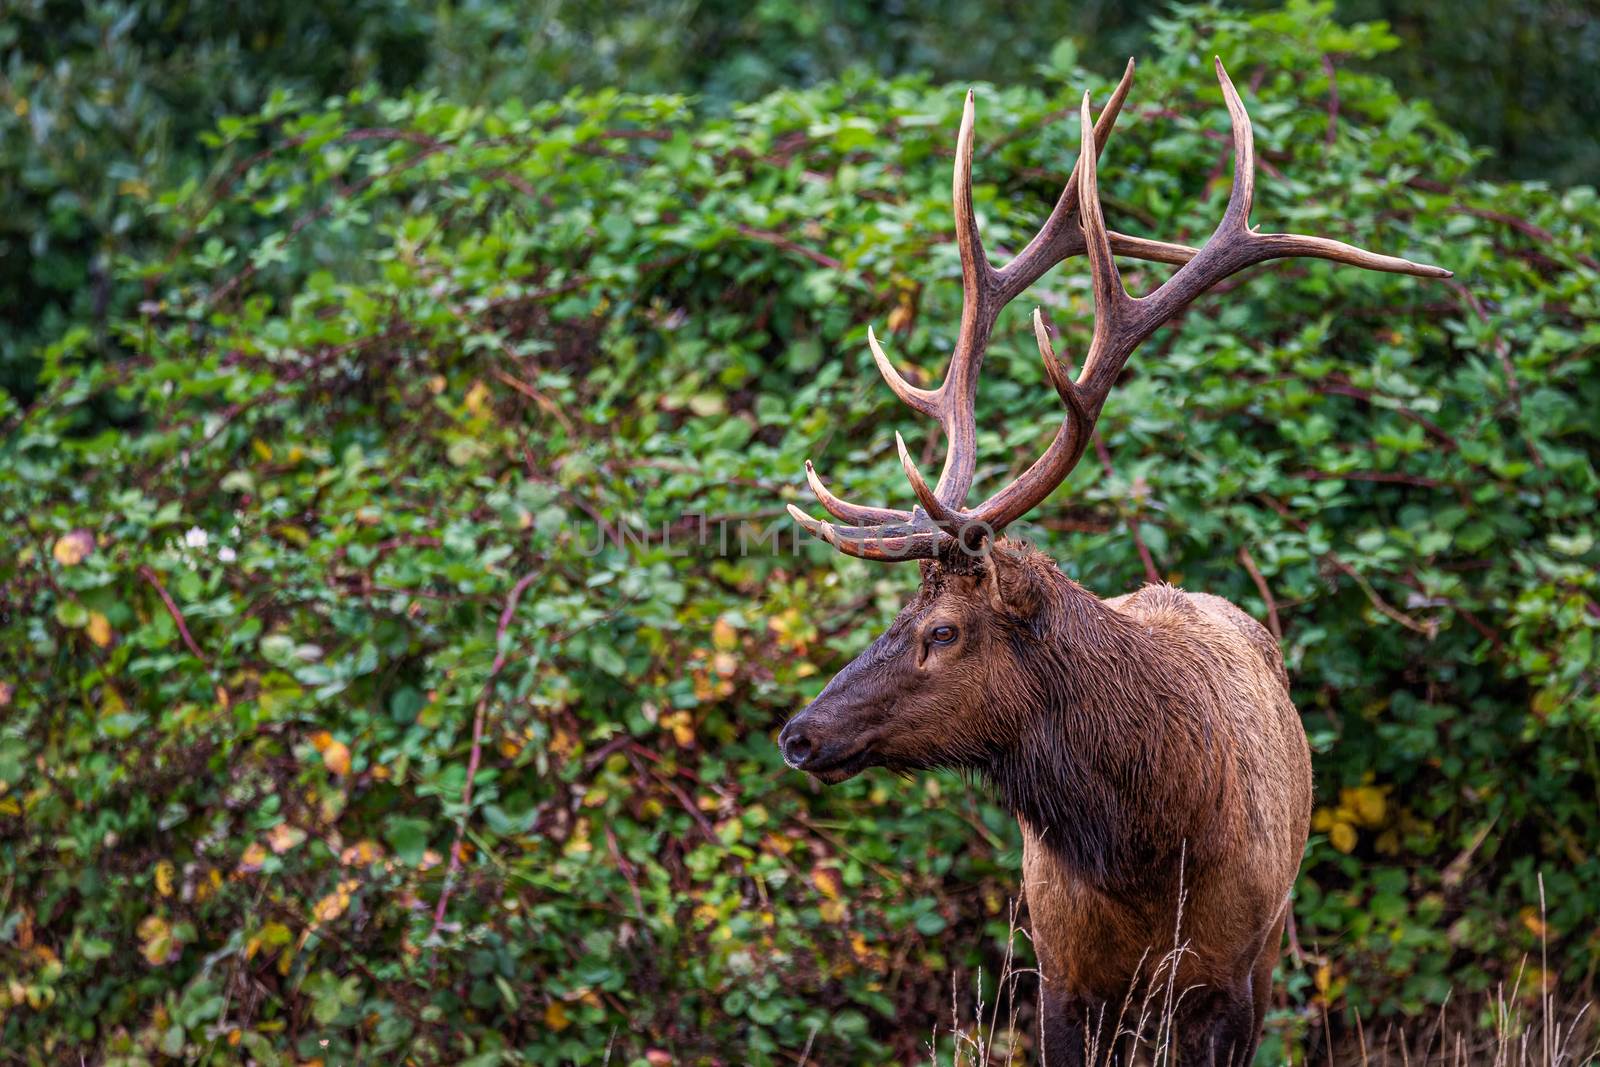 Roosevelt Bull Elk Standing in Front of Green Vines by backyard_photography